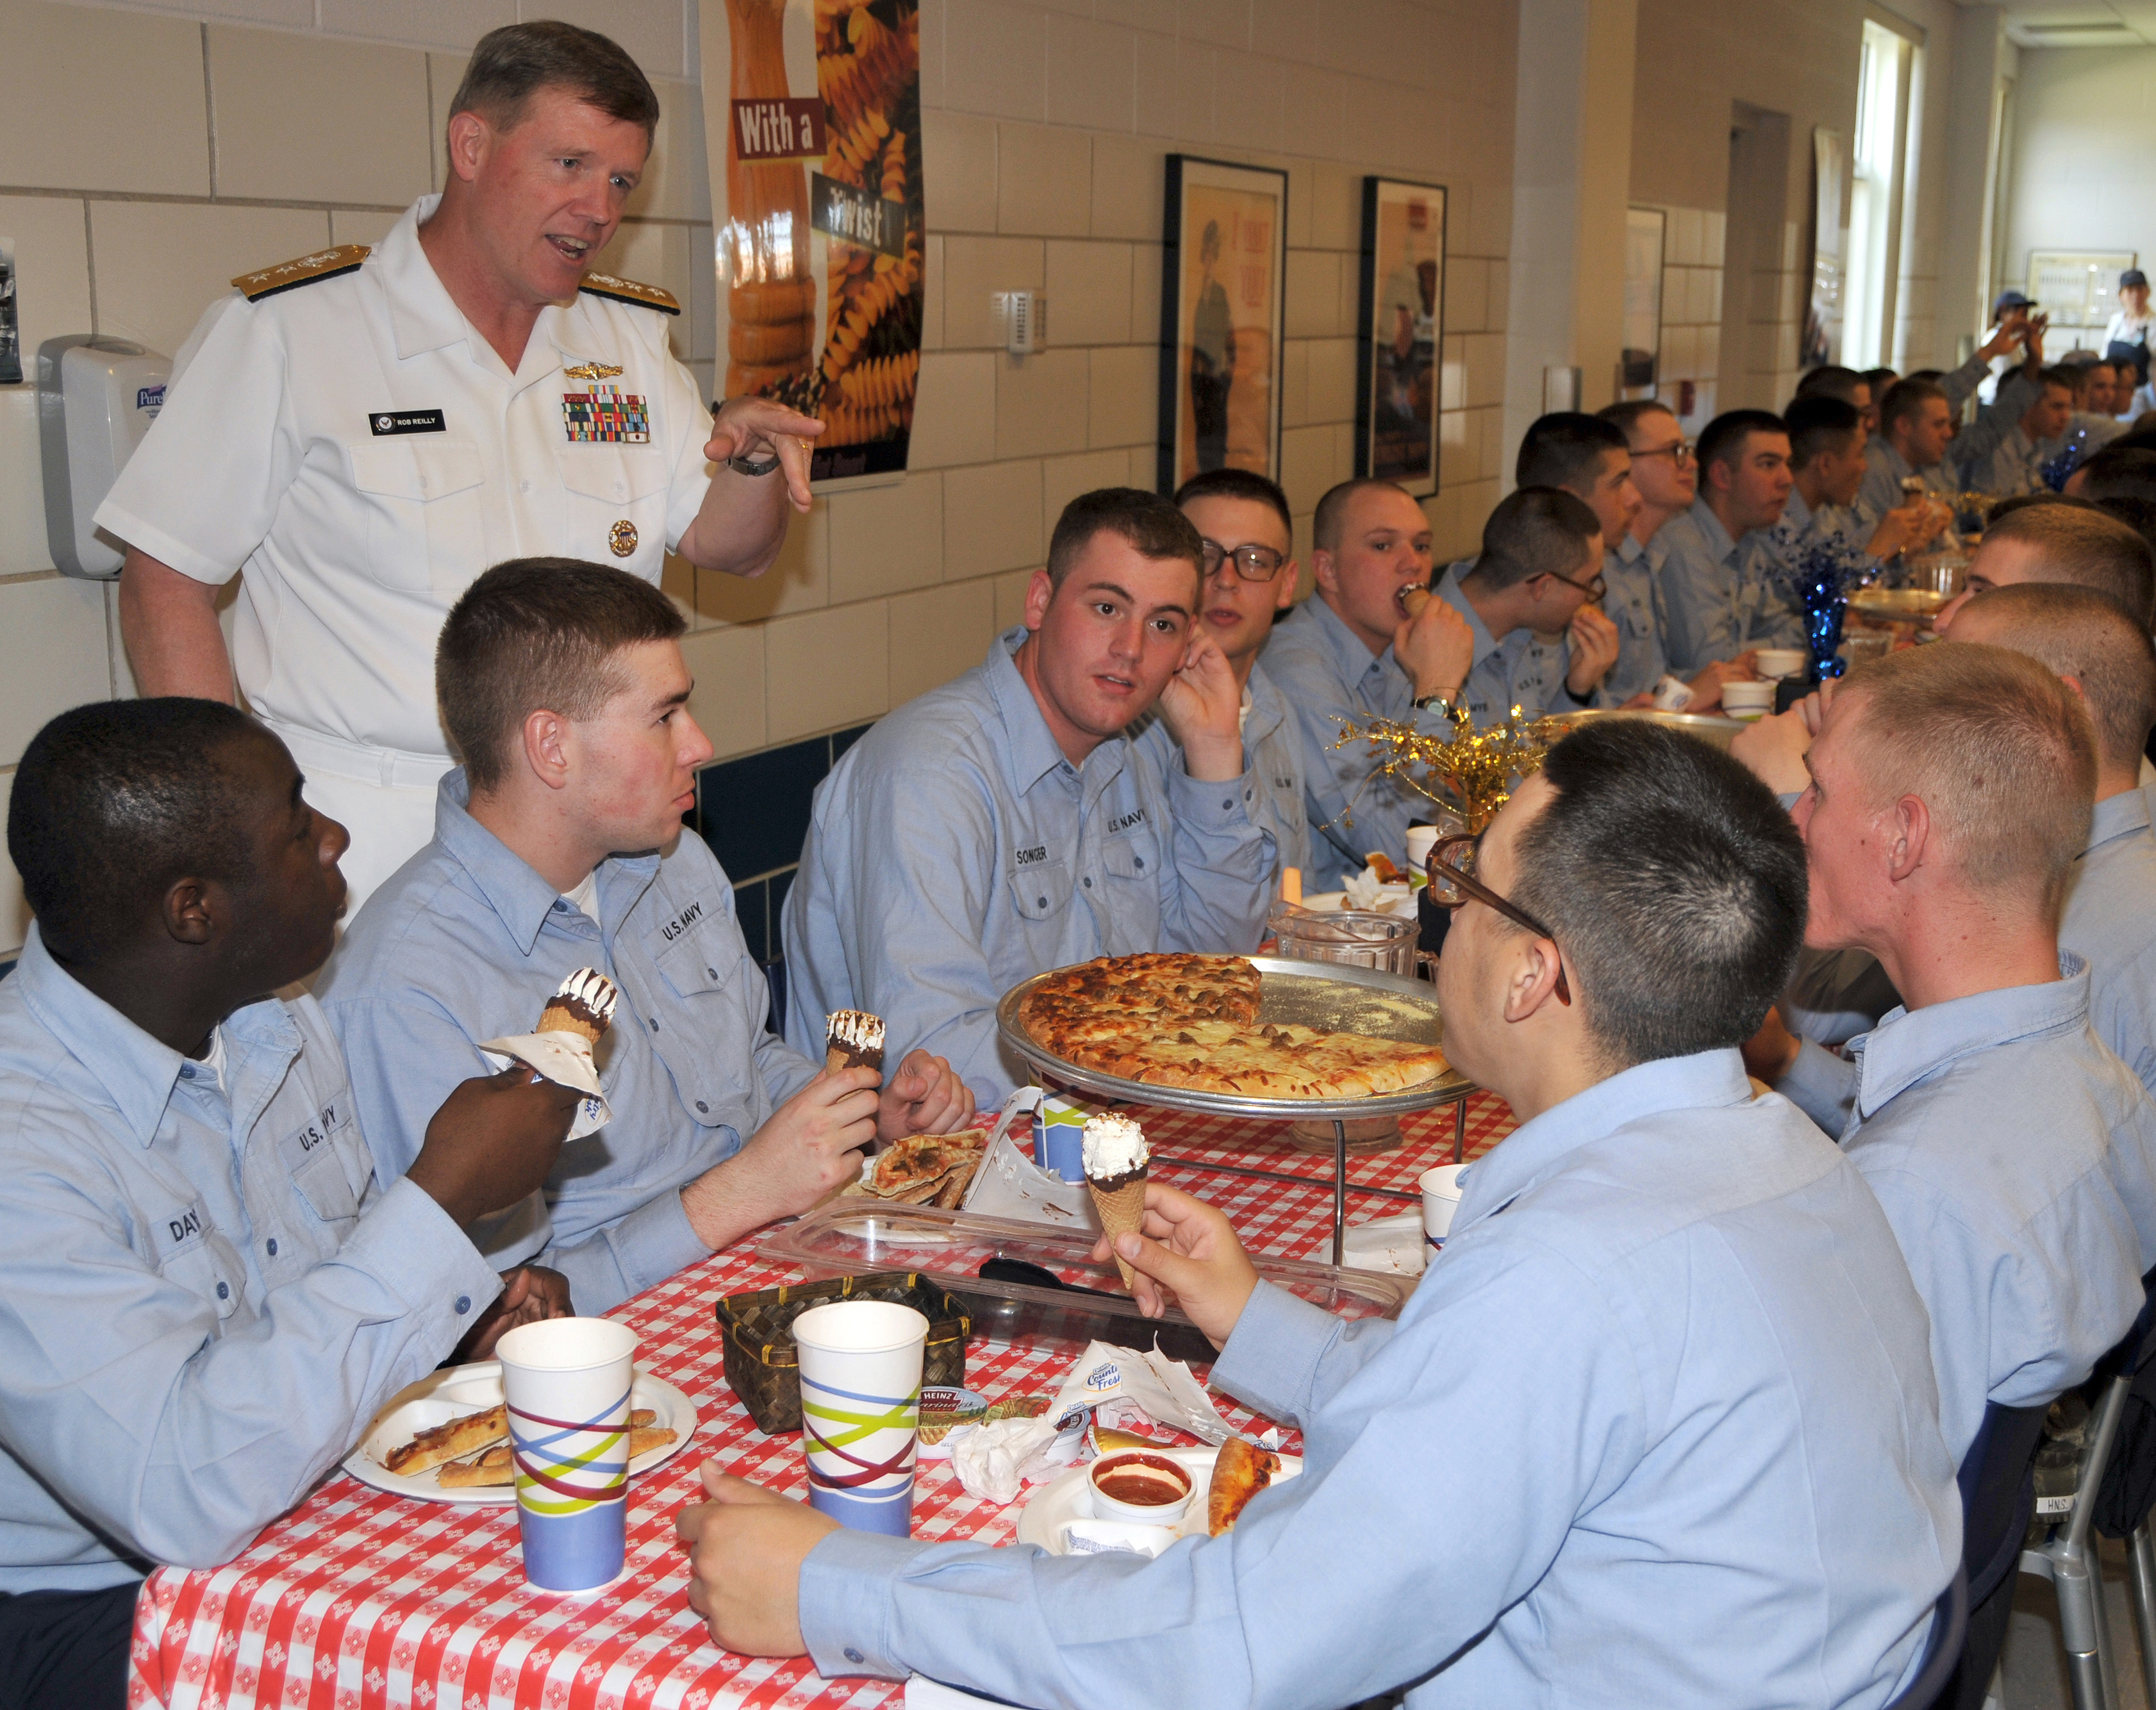 US Navy 090515-N-8848T-300 Rear Adm. Robert D. Reilly, Jr., commander of Military Sealift Command, speaks with recruits during a Pizza Night at Recruit Training Command